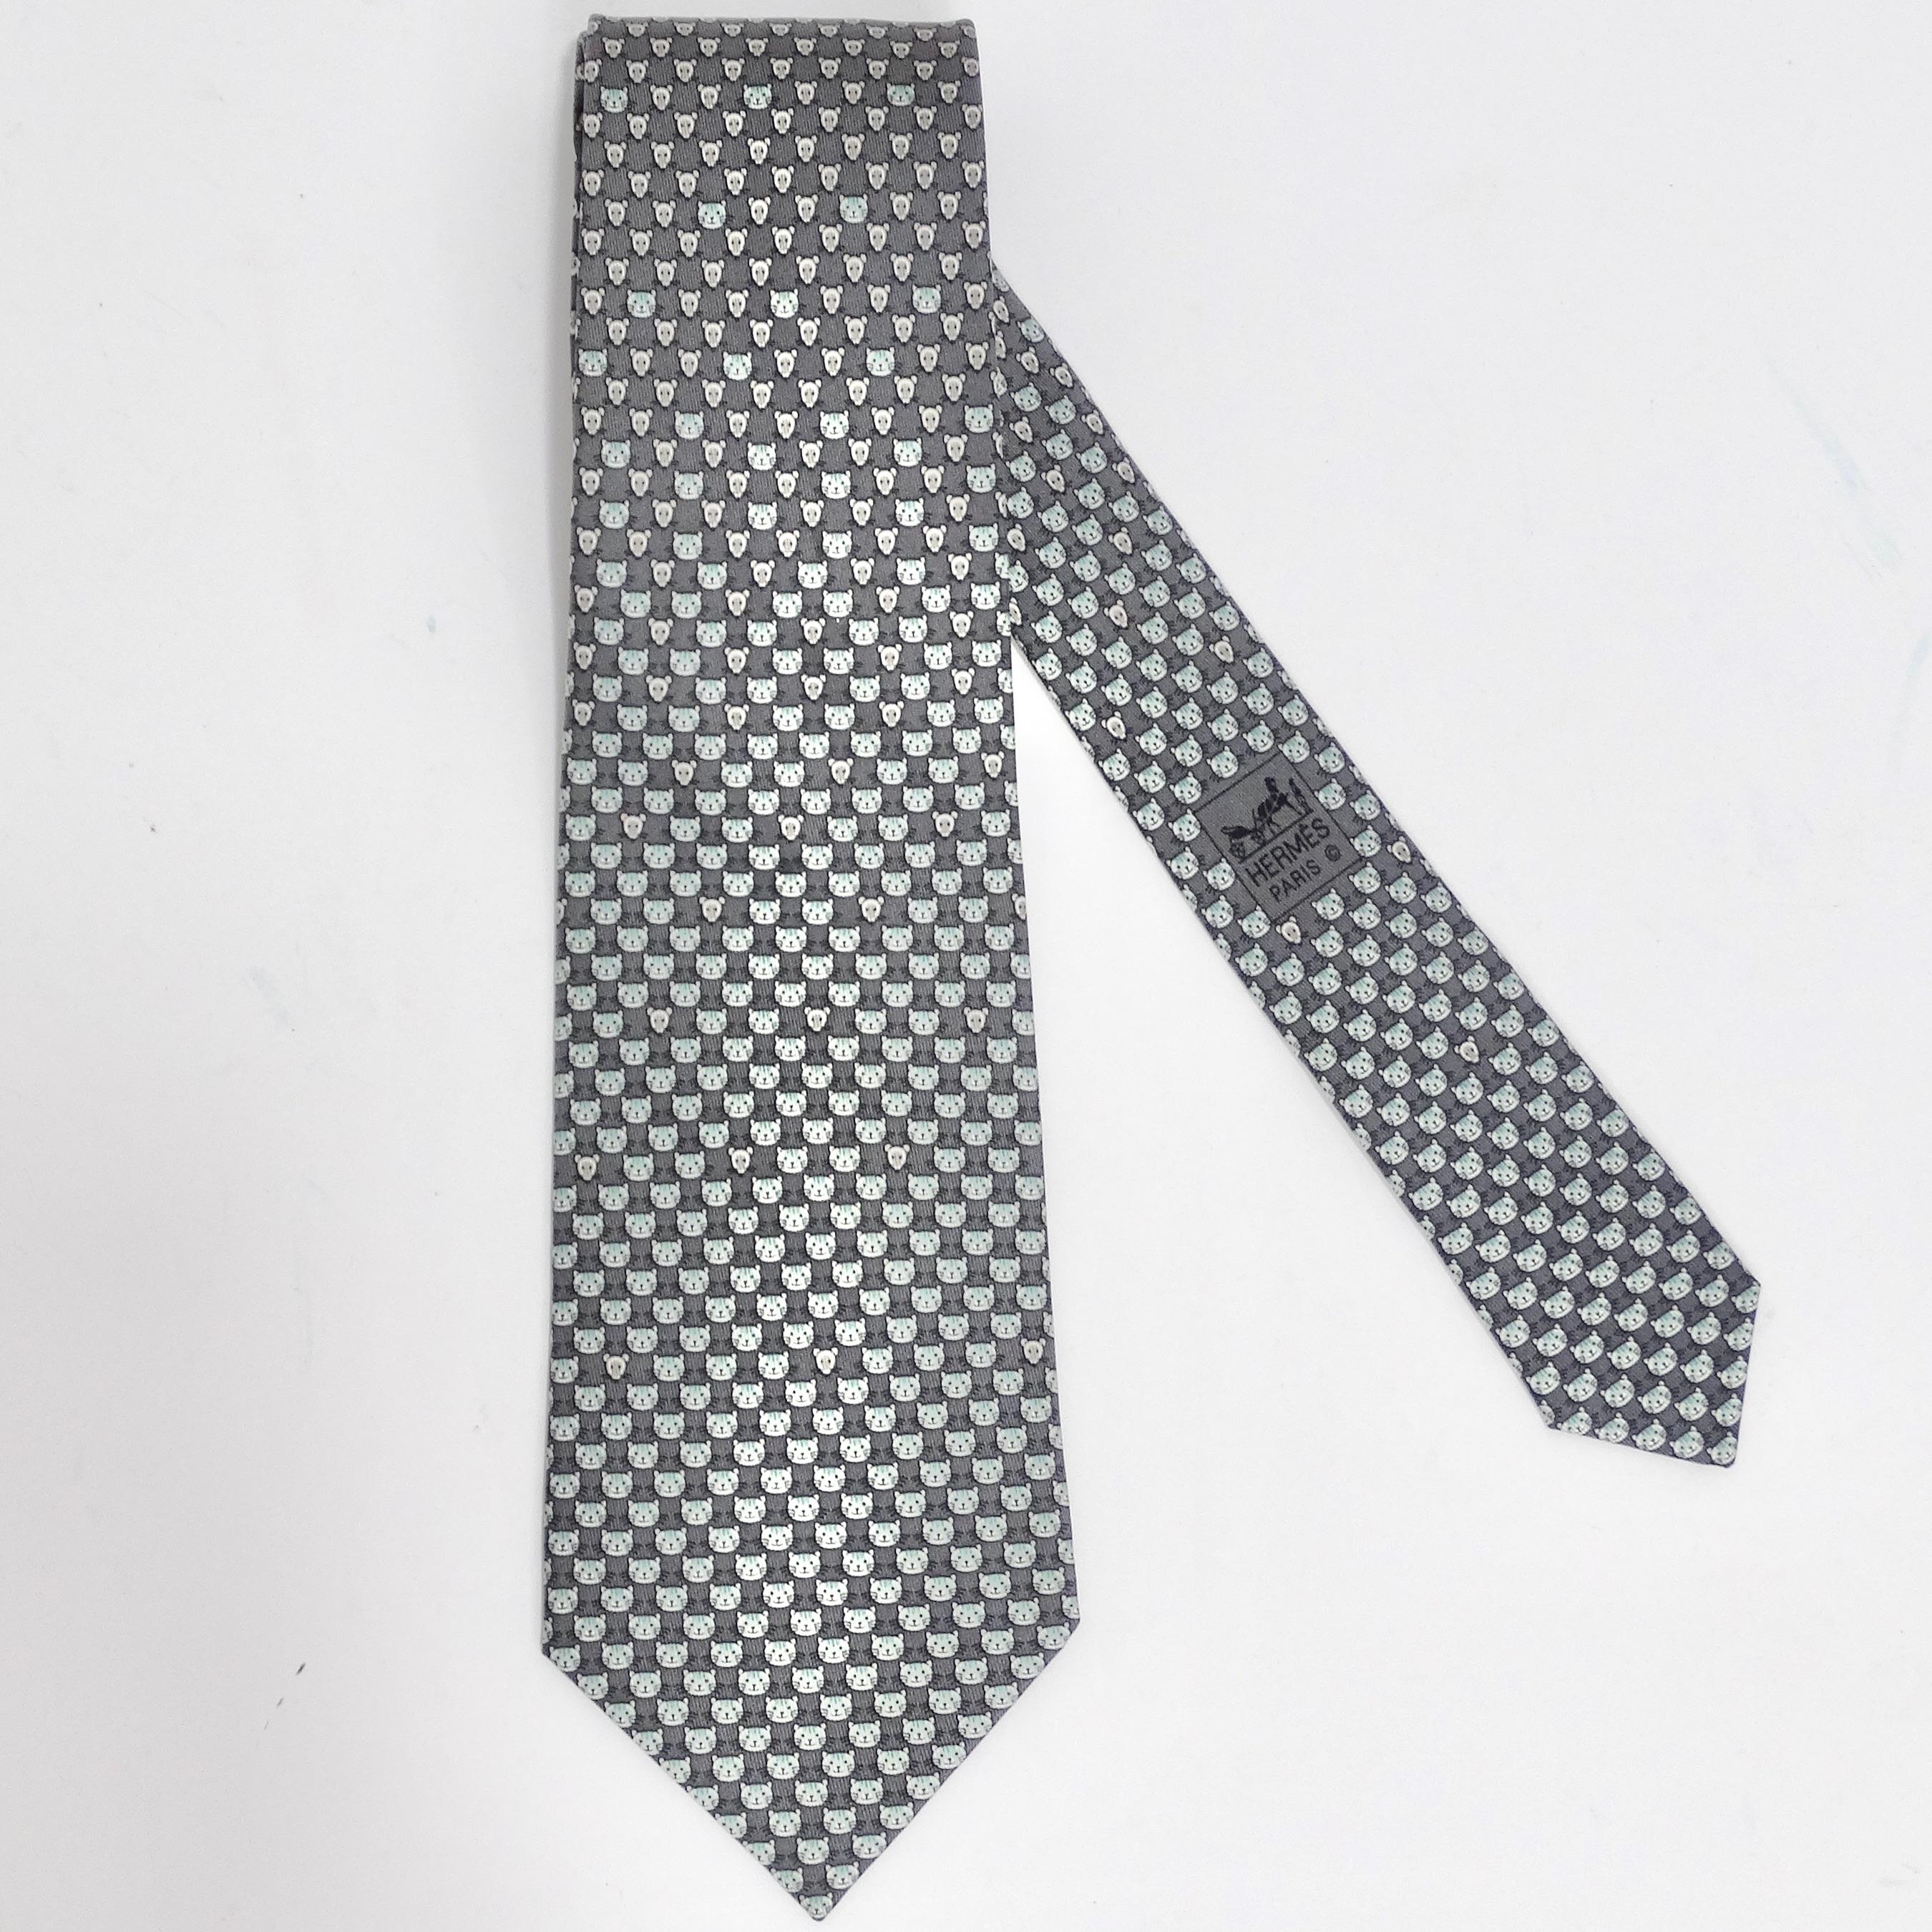 Introducing the Hermes 1990s Cat Print Tie – a classic closet staple with a charming twist! This tie seamlessly blends timeless elegance with a touch of feline whimsy. Crafted in a versatile neutral grey silk, it's adorned with an array of adorable